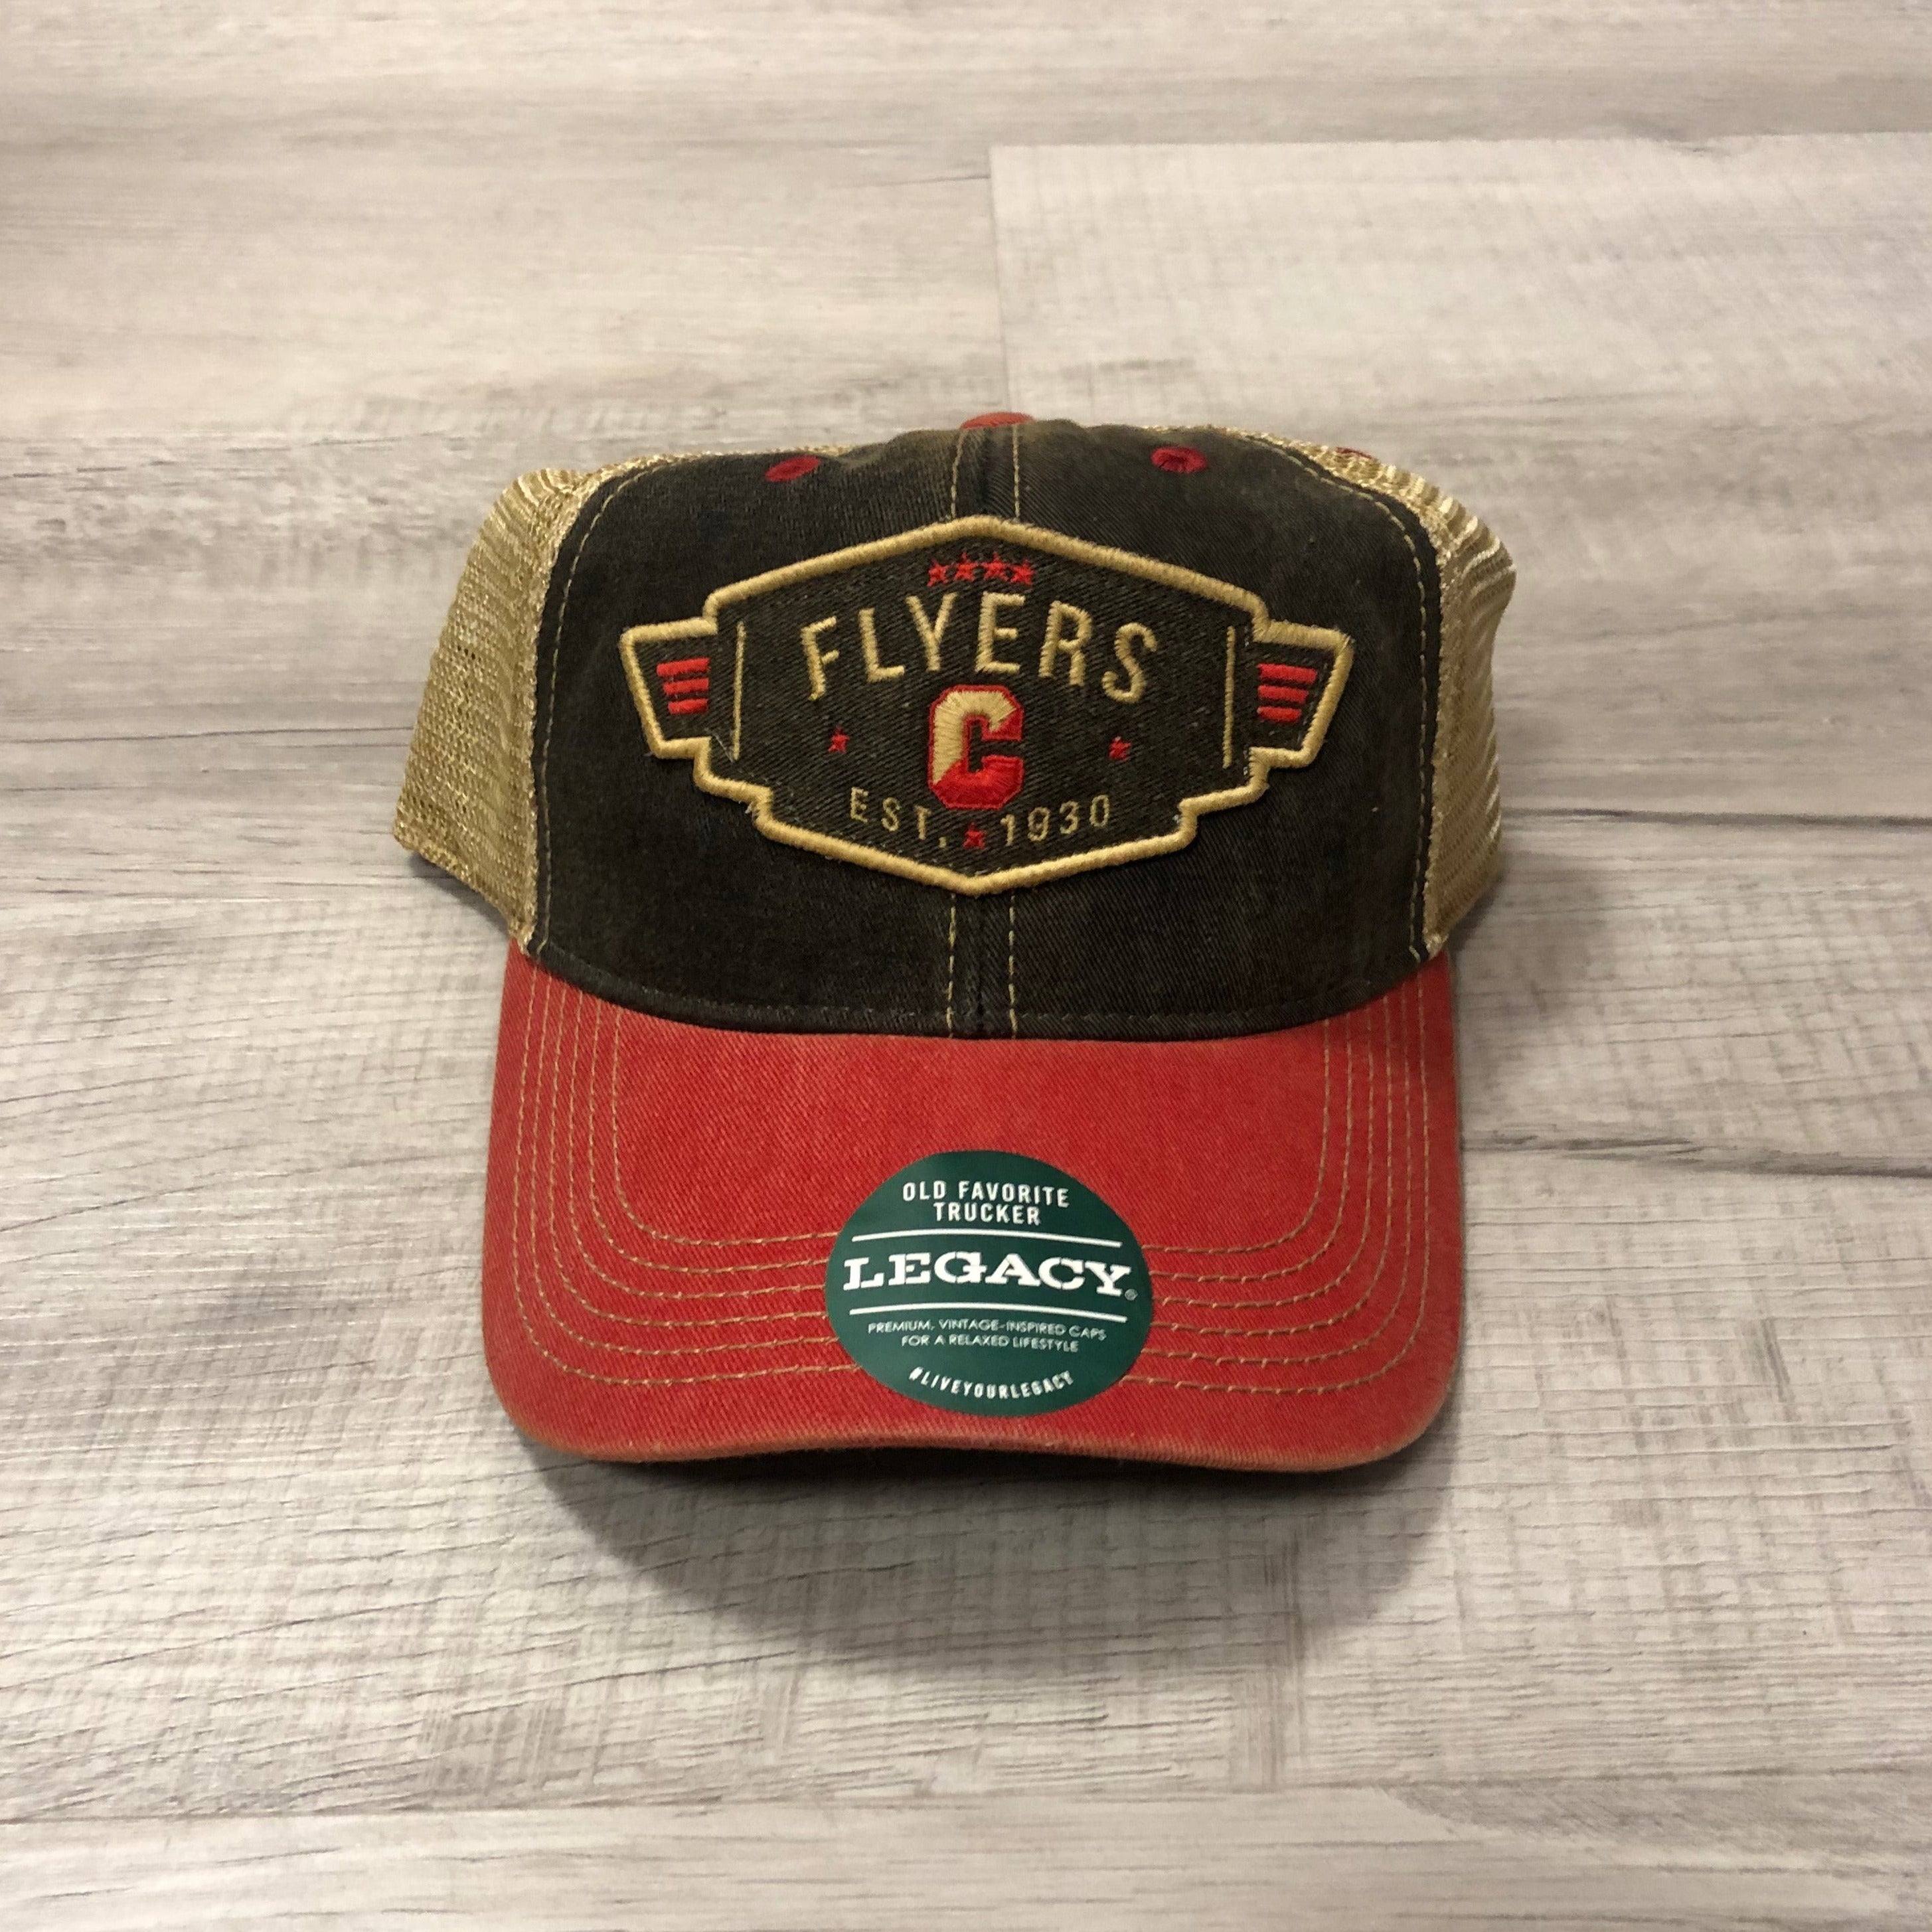 Legacy Trucker Flyers Patch Hat - Flyers (Black, Red, Gold)